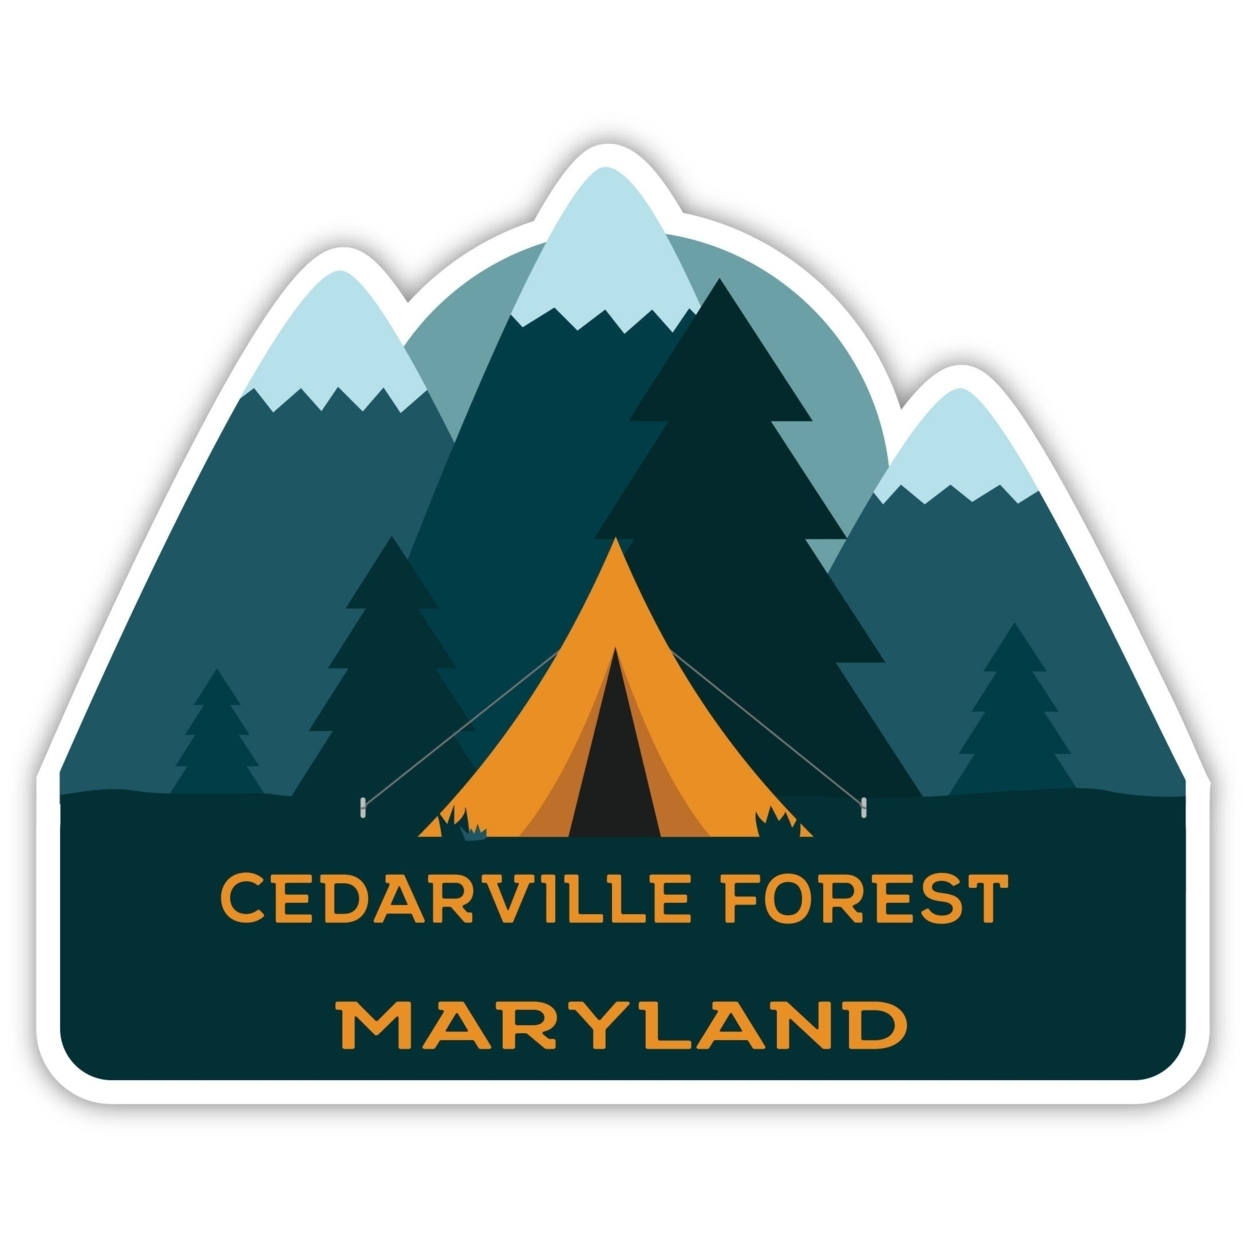 Cedarville Forest Maryland Souvenir Decorative Stickers (Choose Theme And Size) - 4-Pack, 8-Inch, Tent